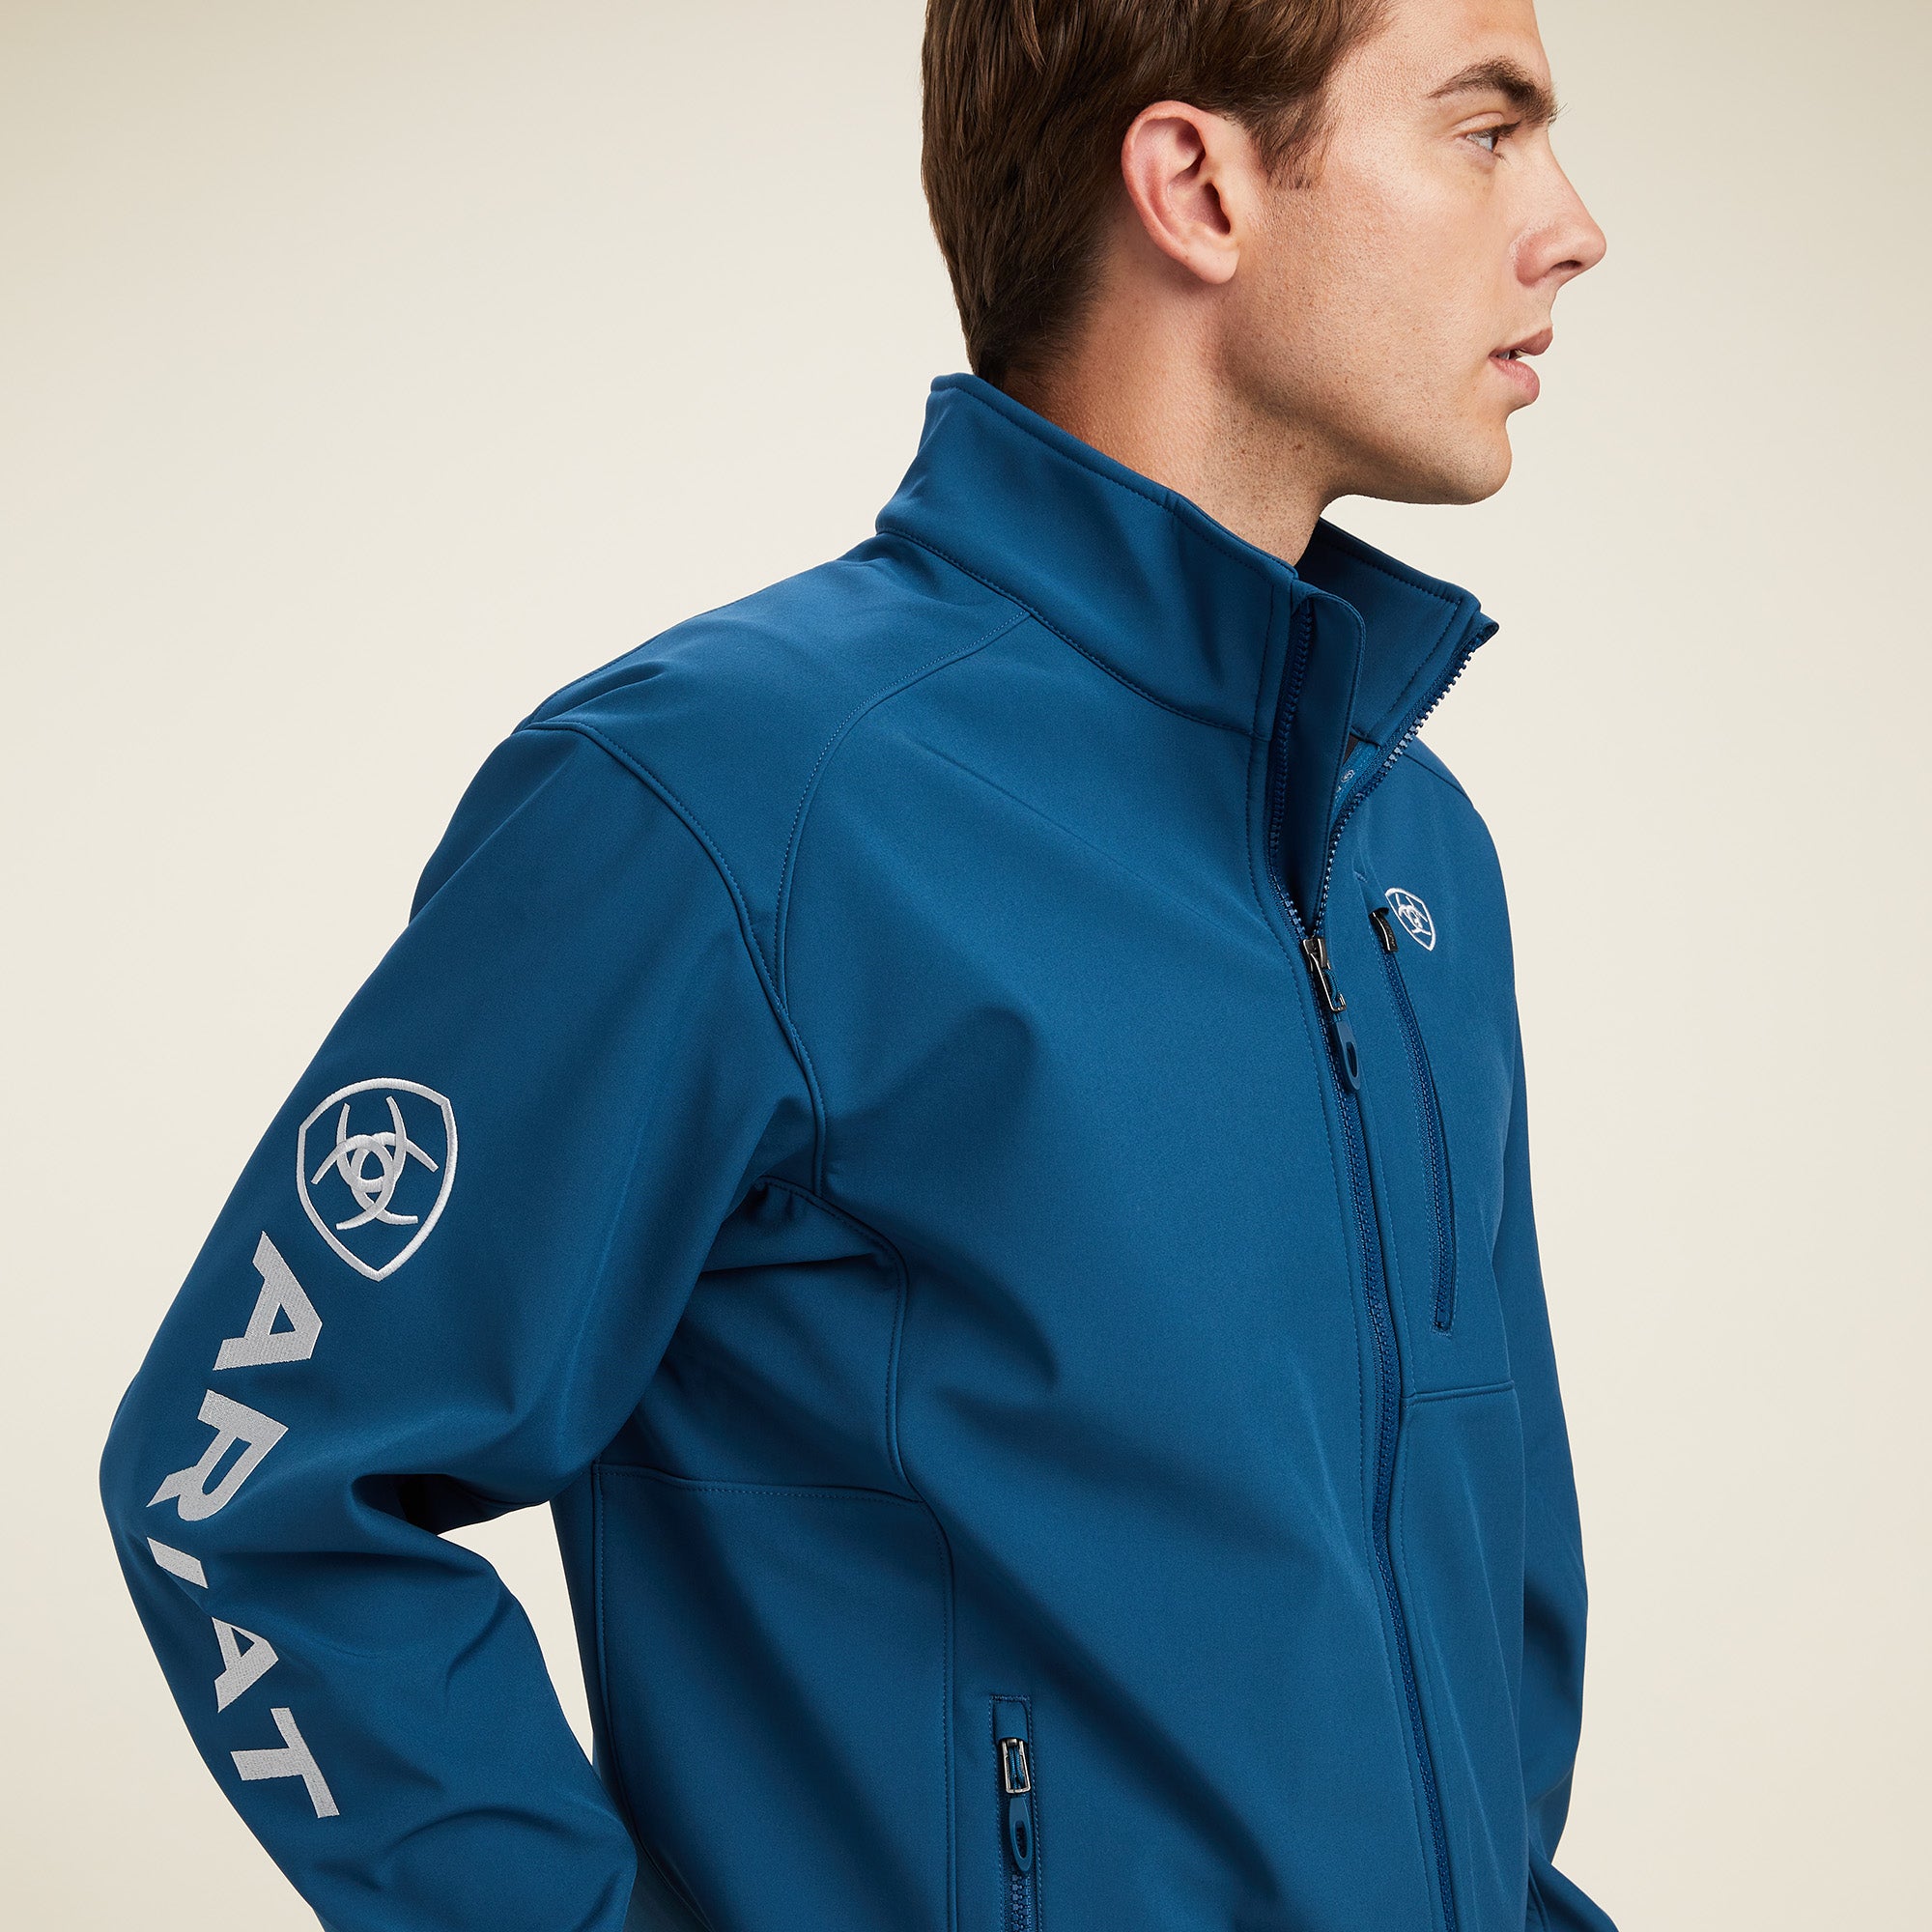 Image side view of Ariat Majolica Blue Softshell Jacket logo.